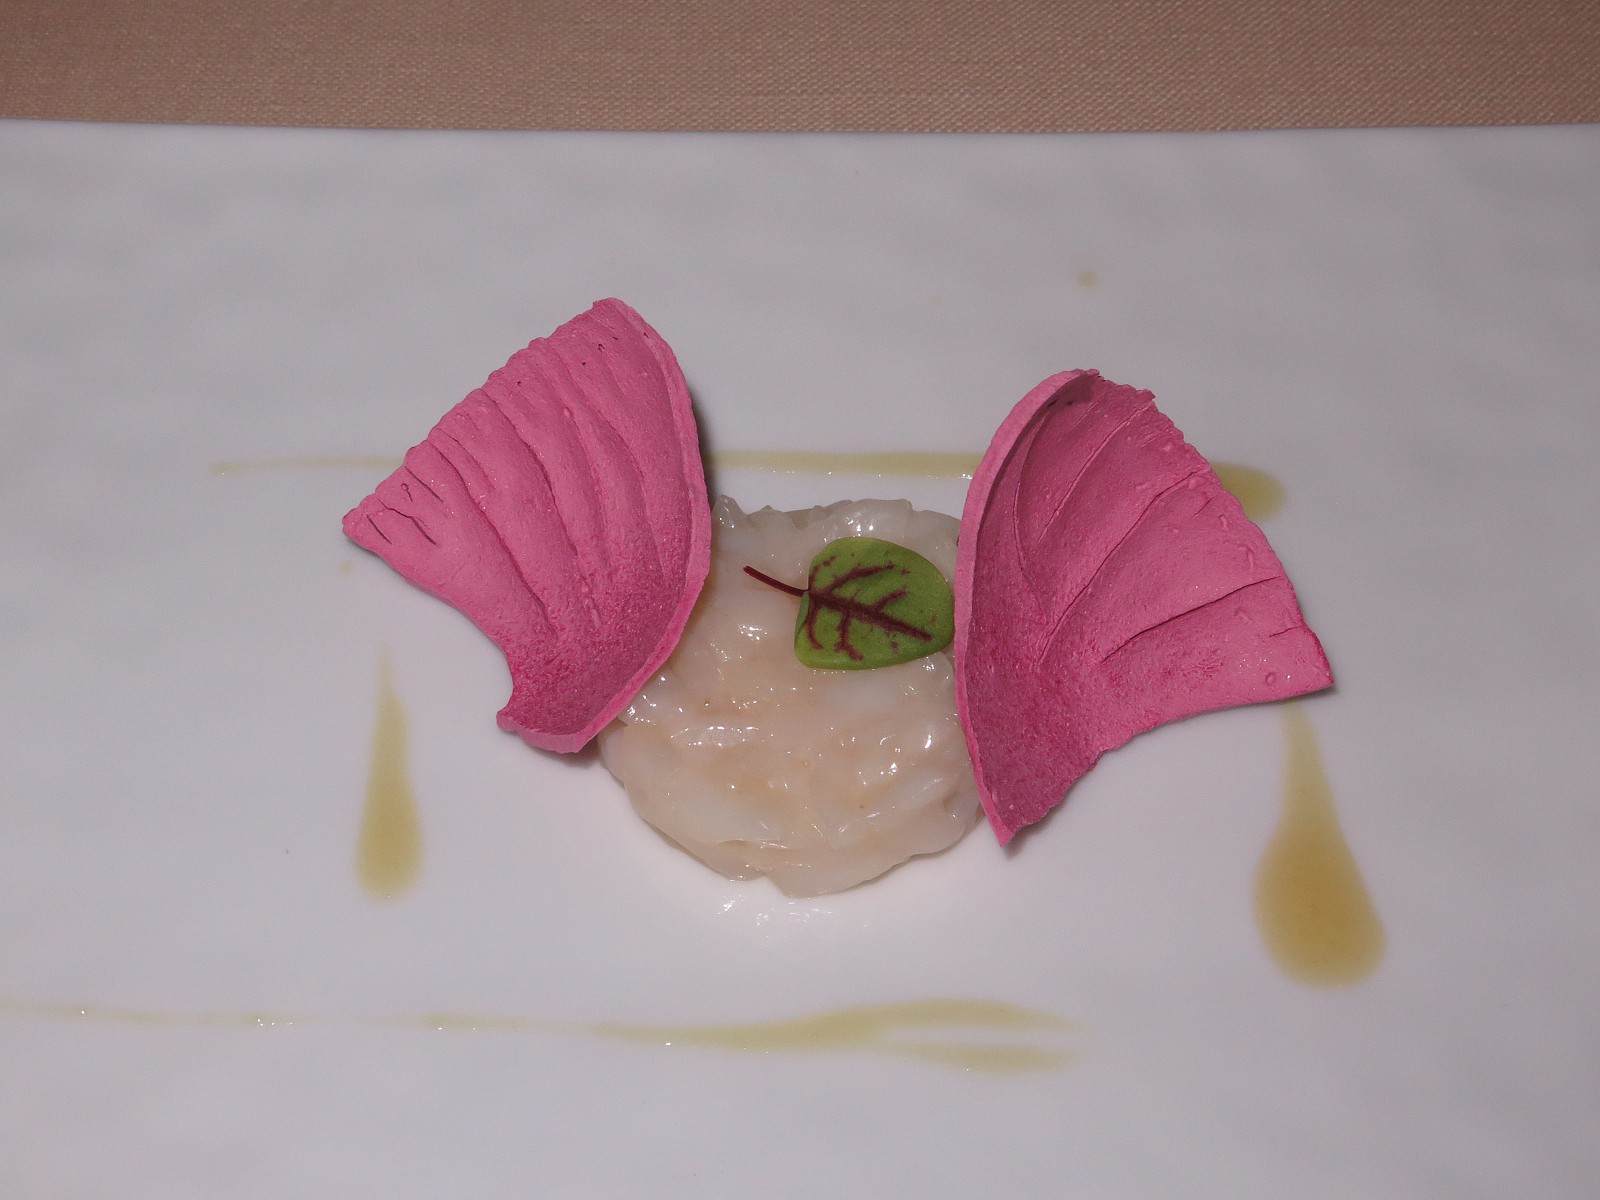 Smoked scallop tartare and red beet shell